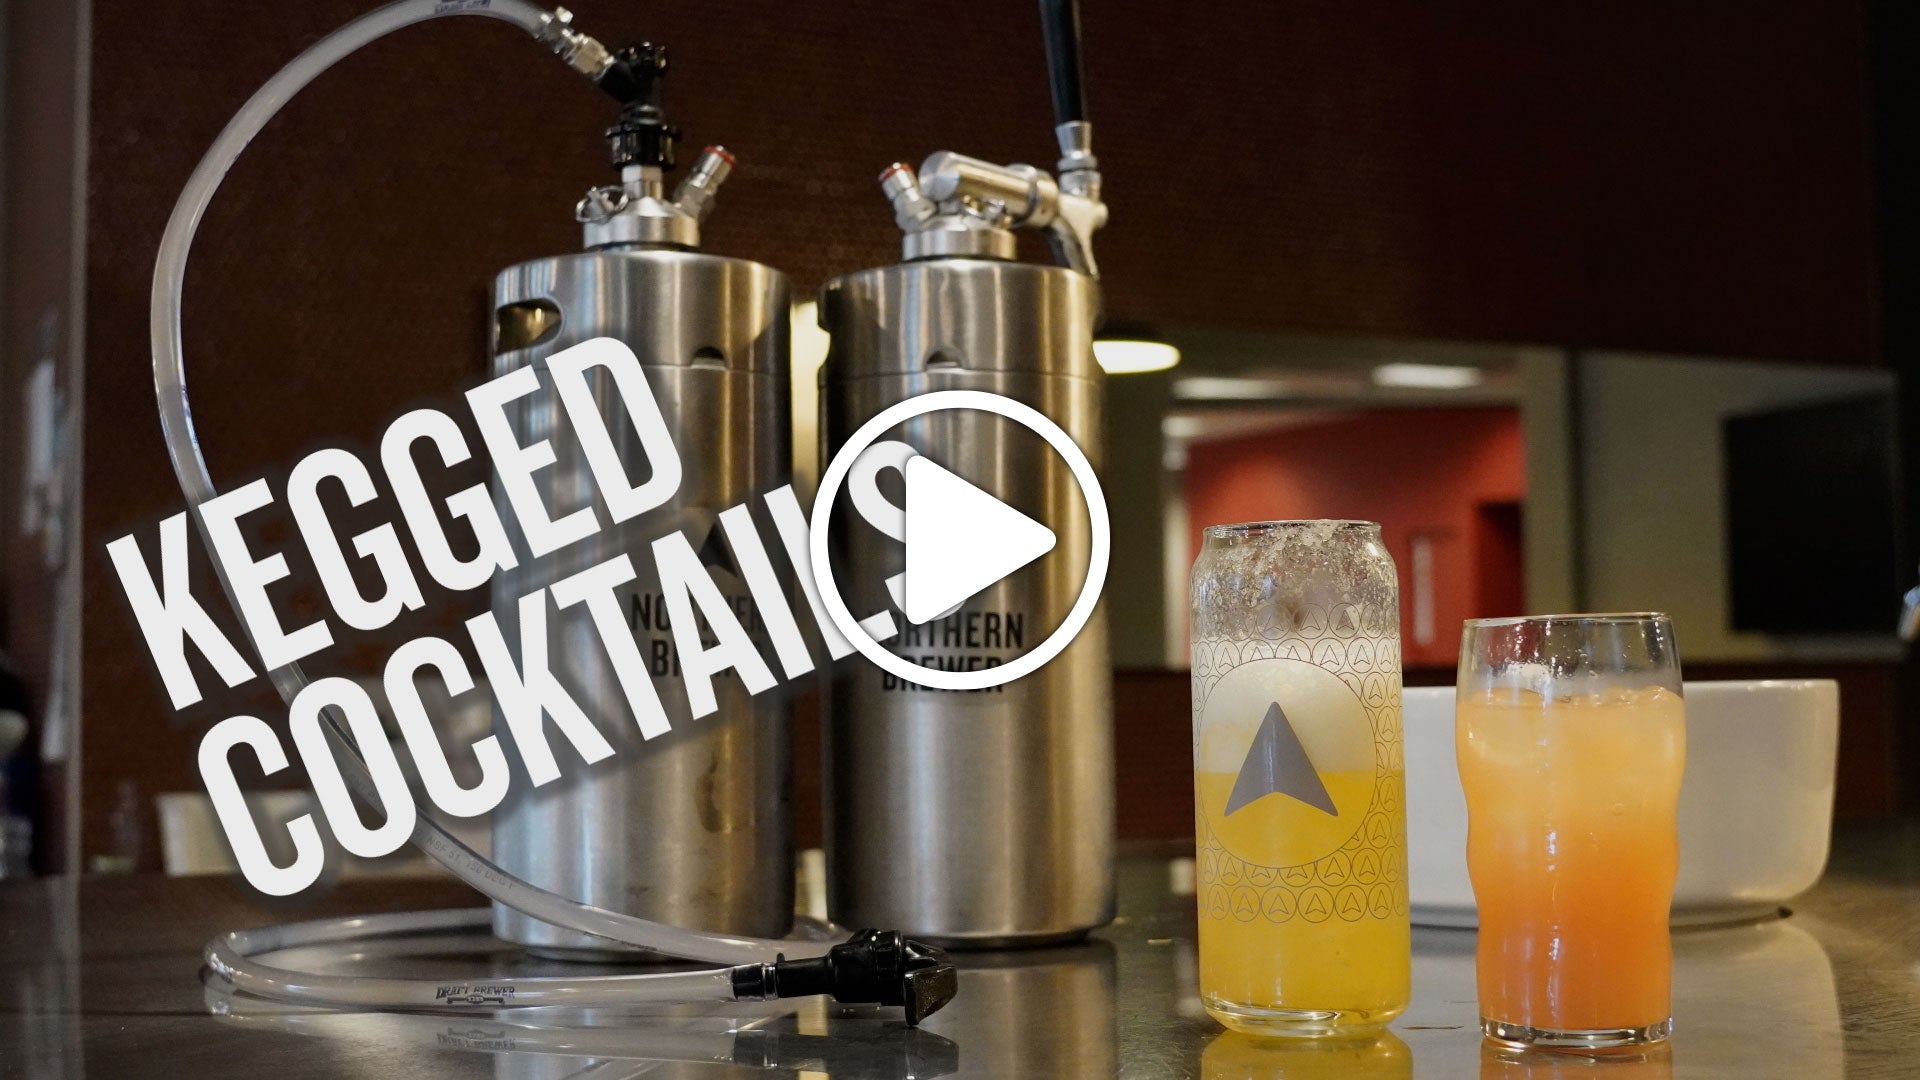 two kegs with two glasses of cocktails, text "Kegged Cocktails"